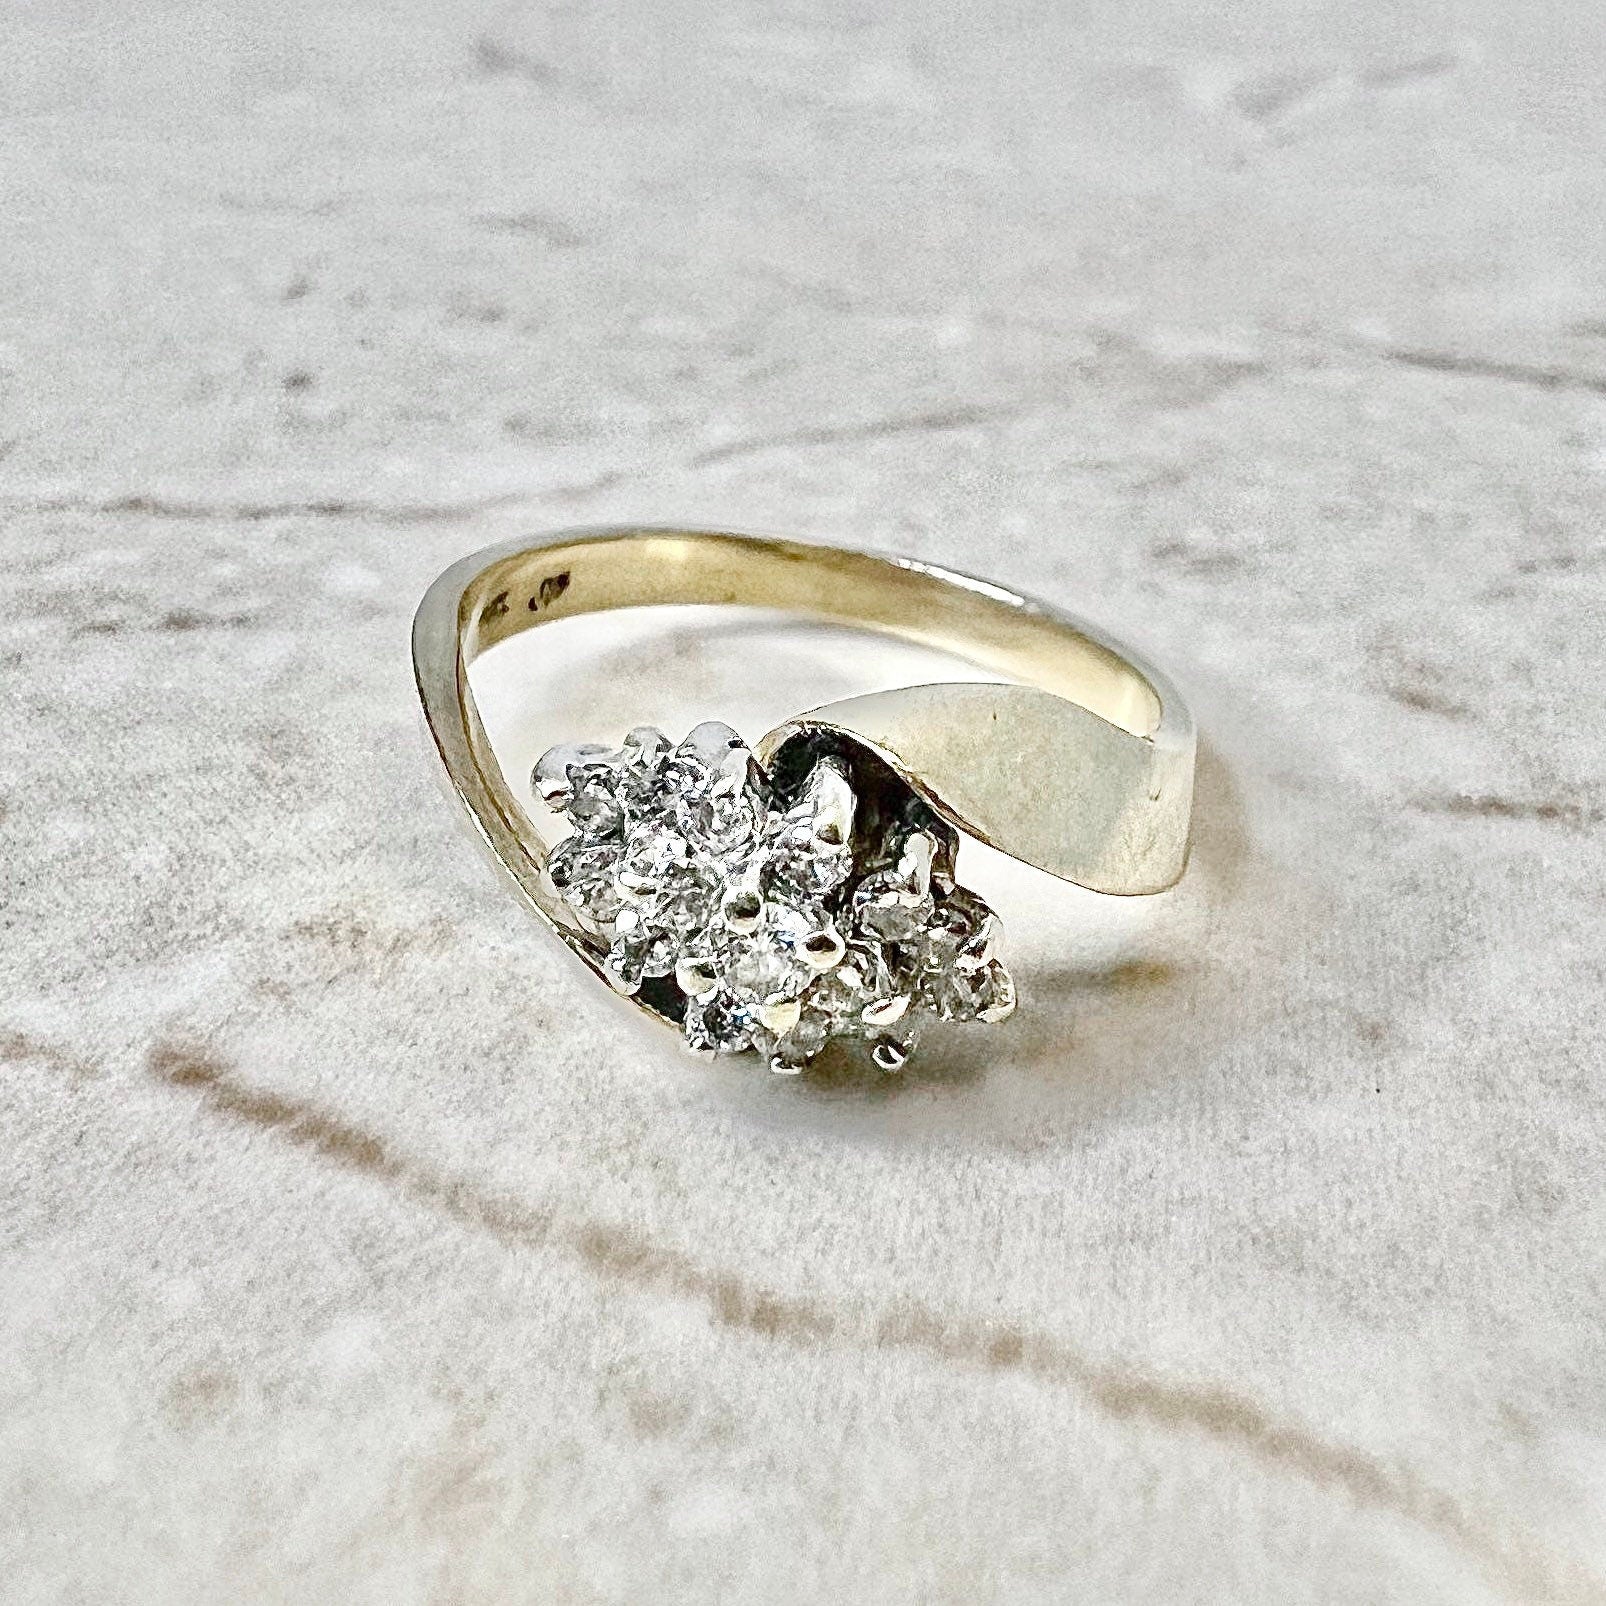 Vintage 14K Diamond Cluster Ring - Yellow & White Gold Diamond Cocktail Ring - Anniversary Ring - Best Birthday Gift For Her - Jewelry Sale